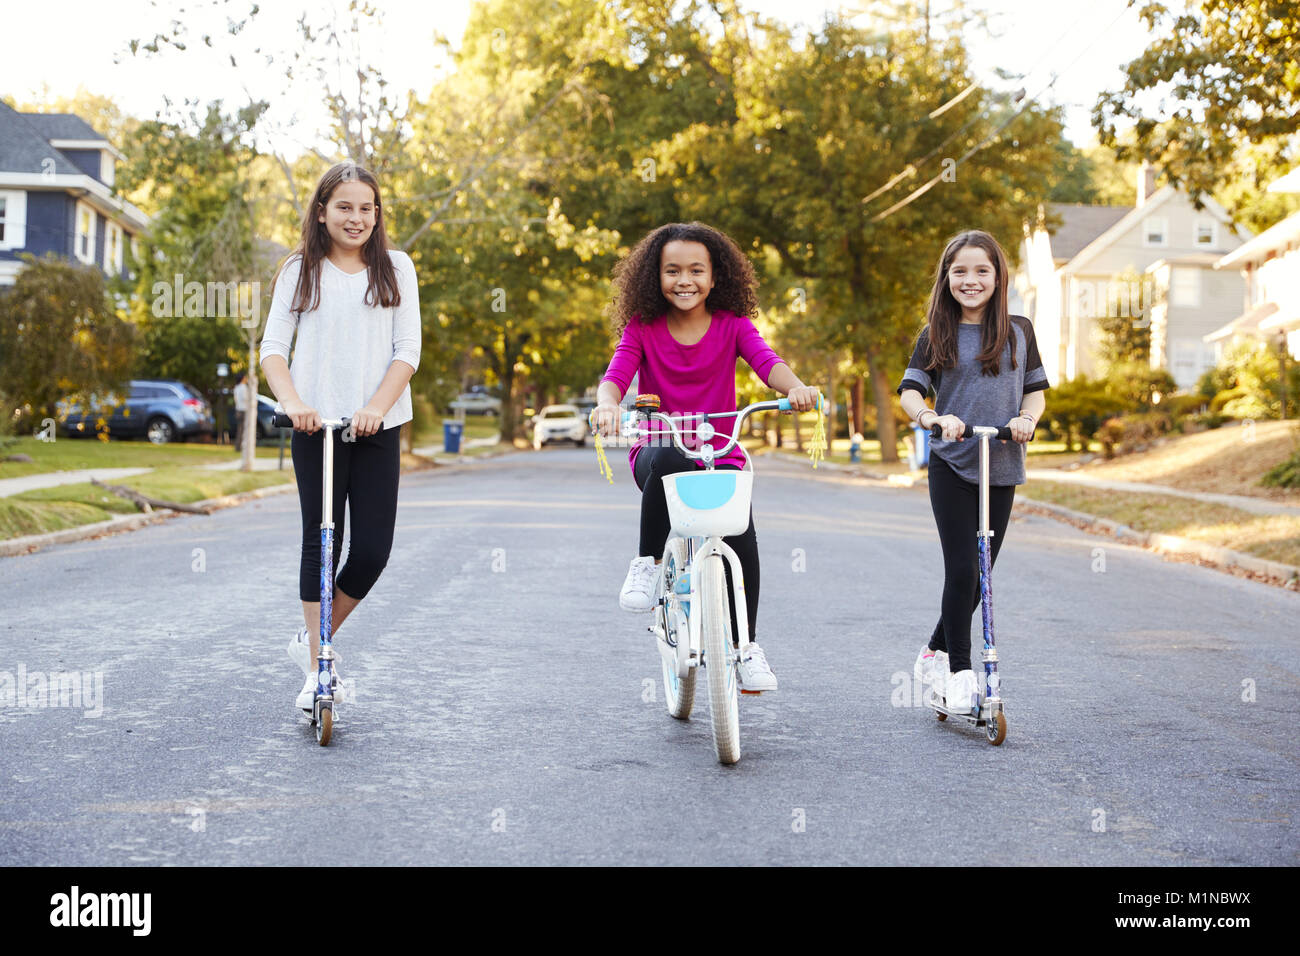 Three pre-teen girls on scooters and bike looking to camera Stock Photo